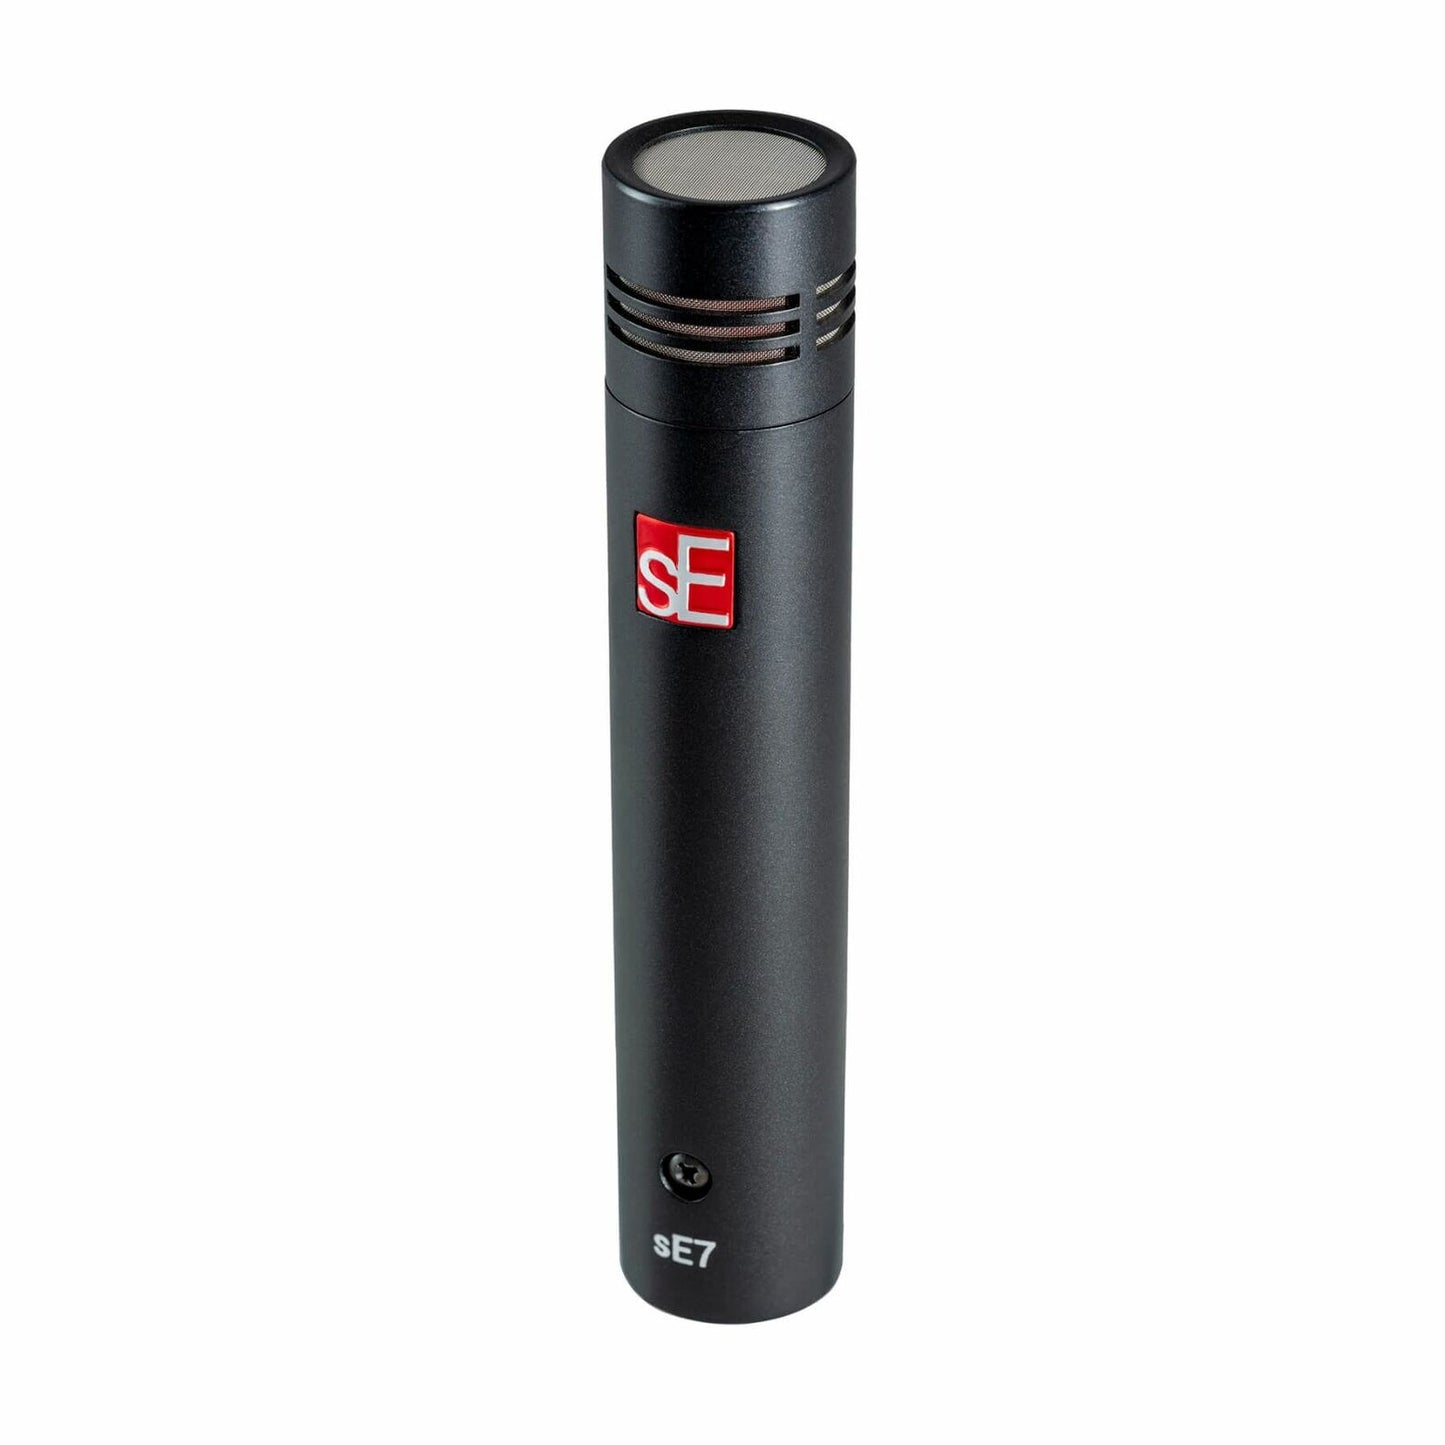 sE Electronics SE7 Small Diaphragm Cardioid Condenser Microphone with Clip